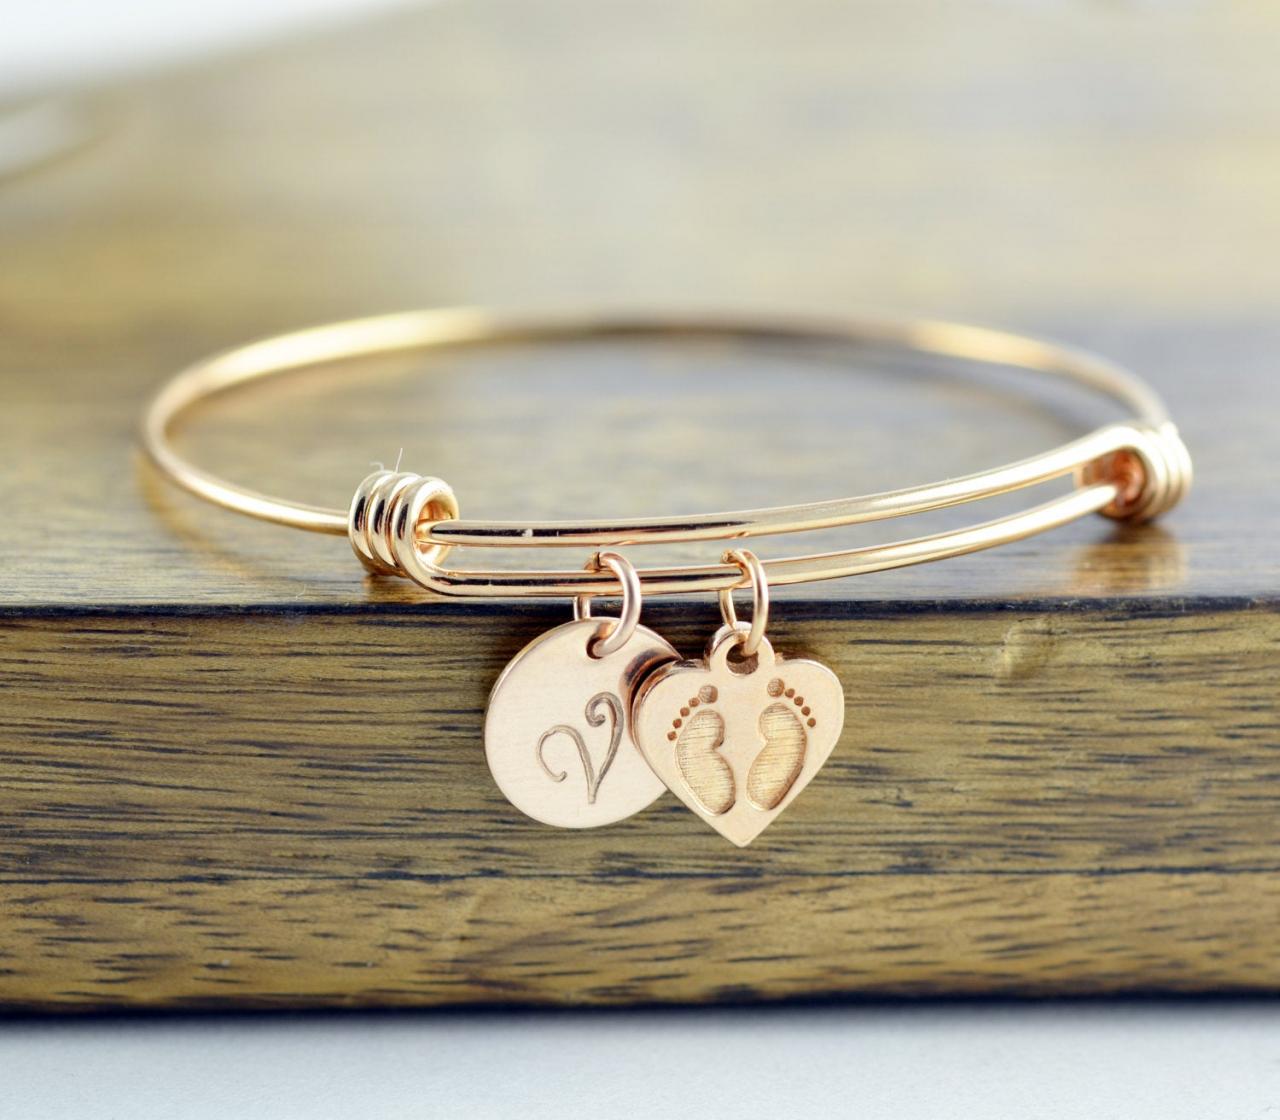 Personalized Initial Bracelet, Mom Gift, Personalized Rose Gold Bracelet, Baby Gift, Baby Feet Charm, Gift For Her